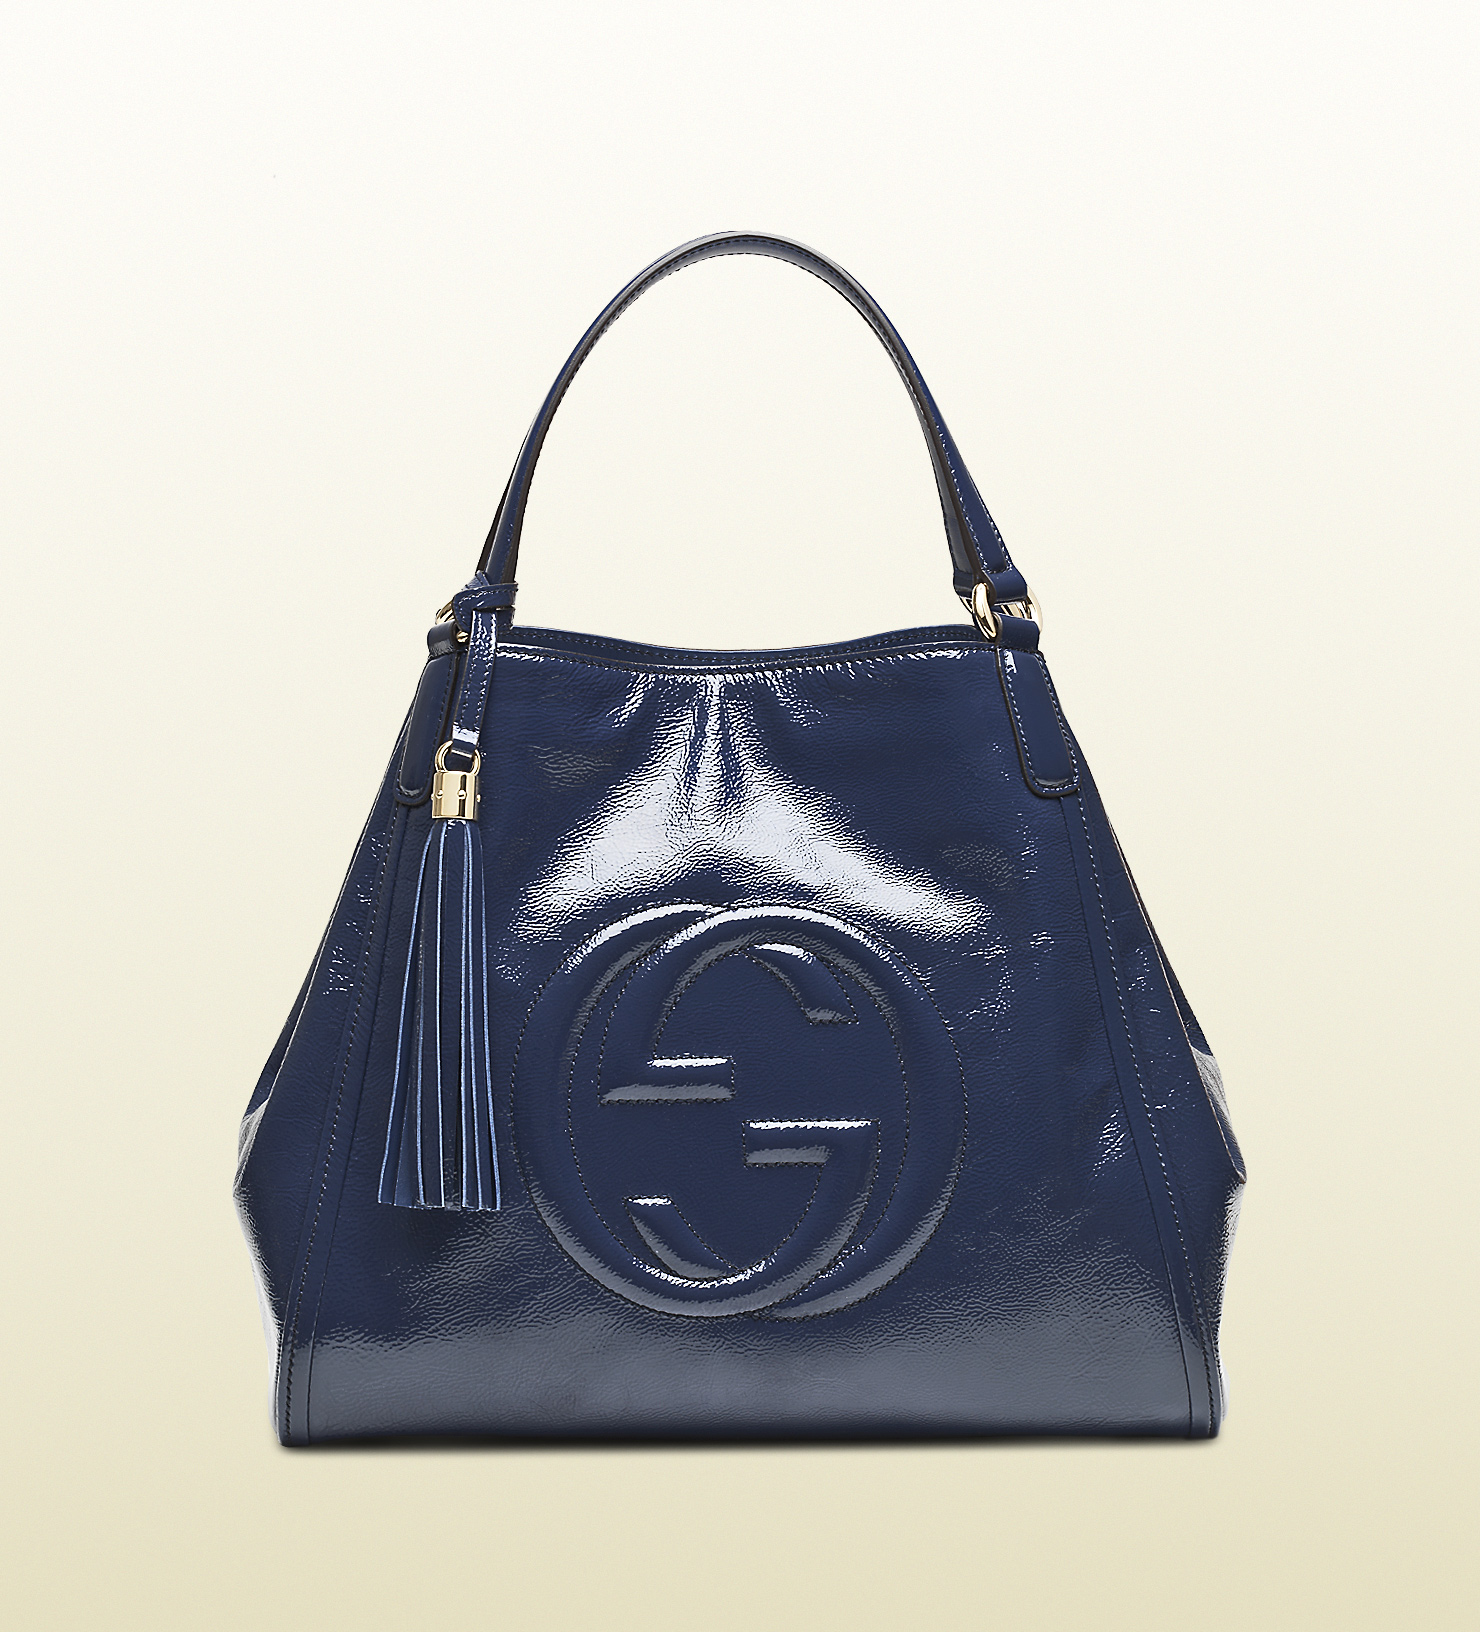 Gucci Soho Soft Patent Leather Shoulder Bag in Blue | Lyst